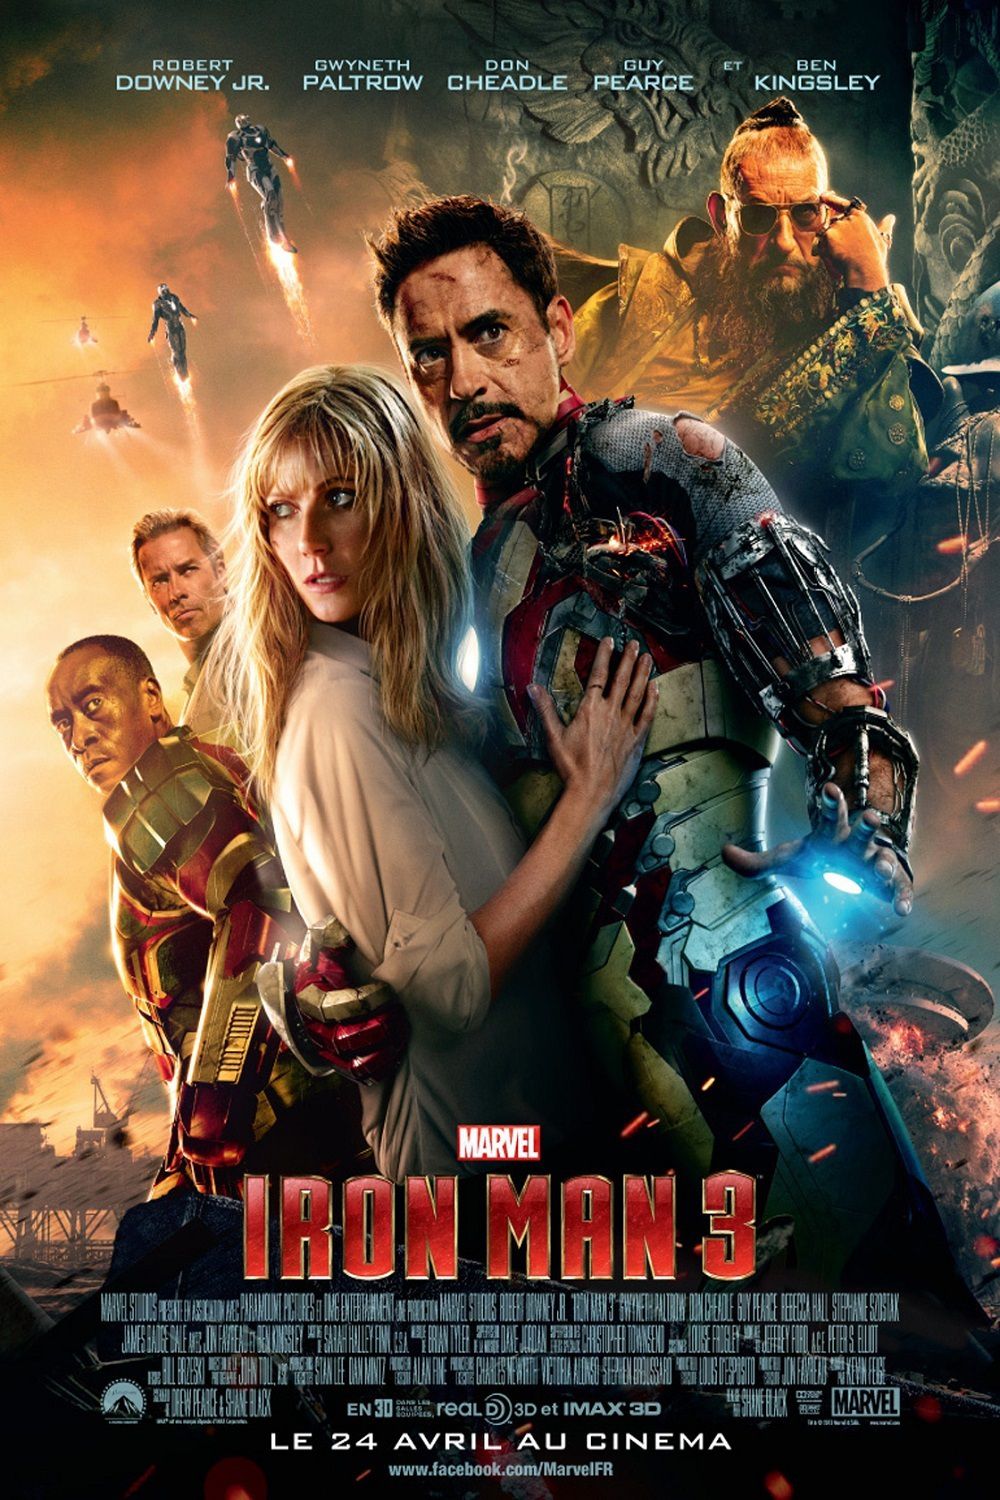 Iron Man 3 - Film (2013) streaming VF gratuit complet